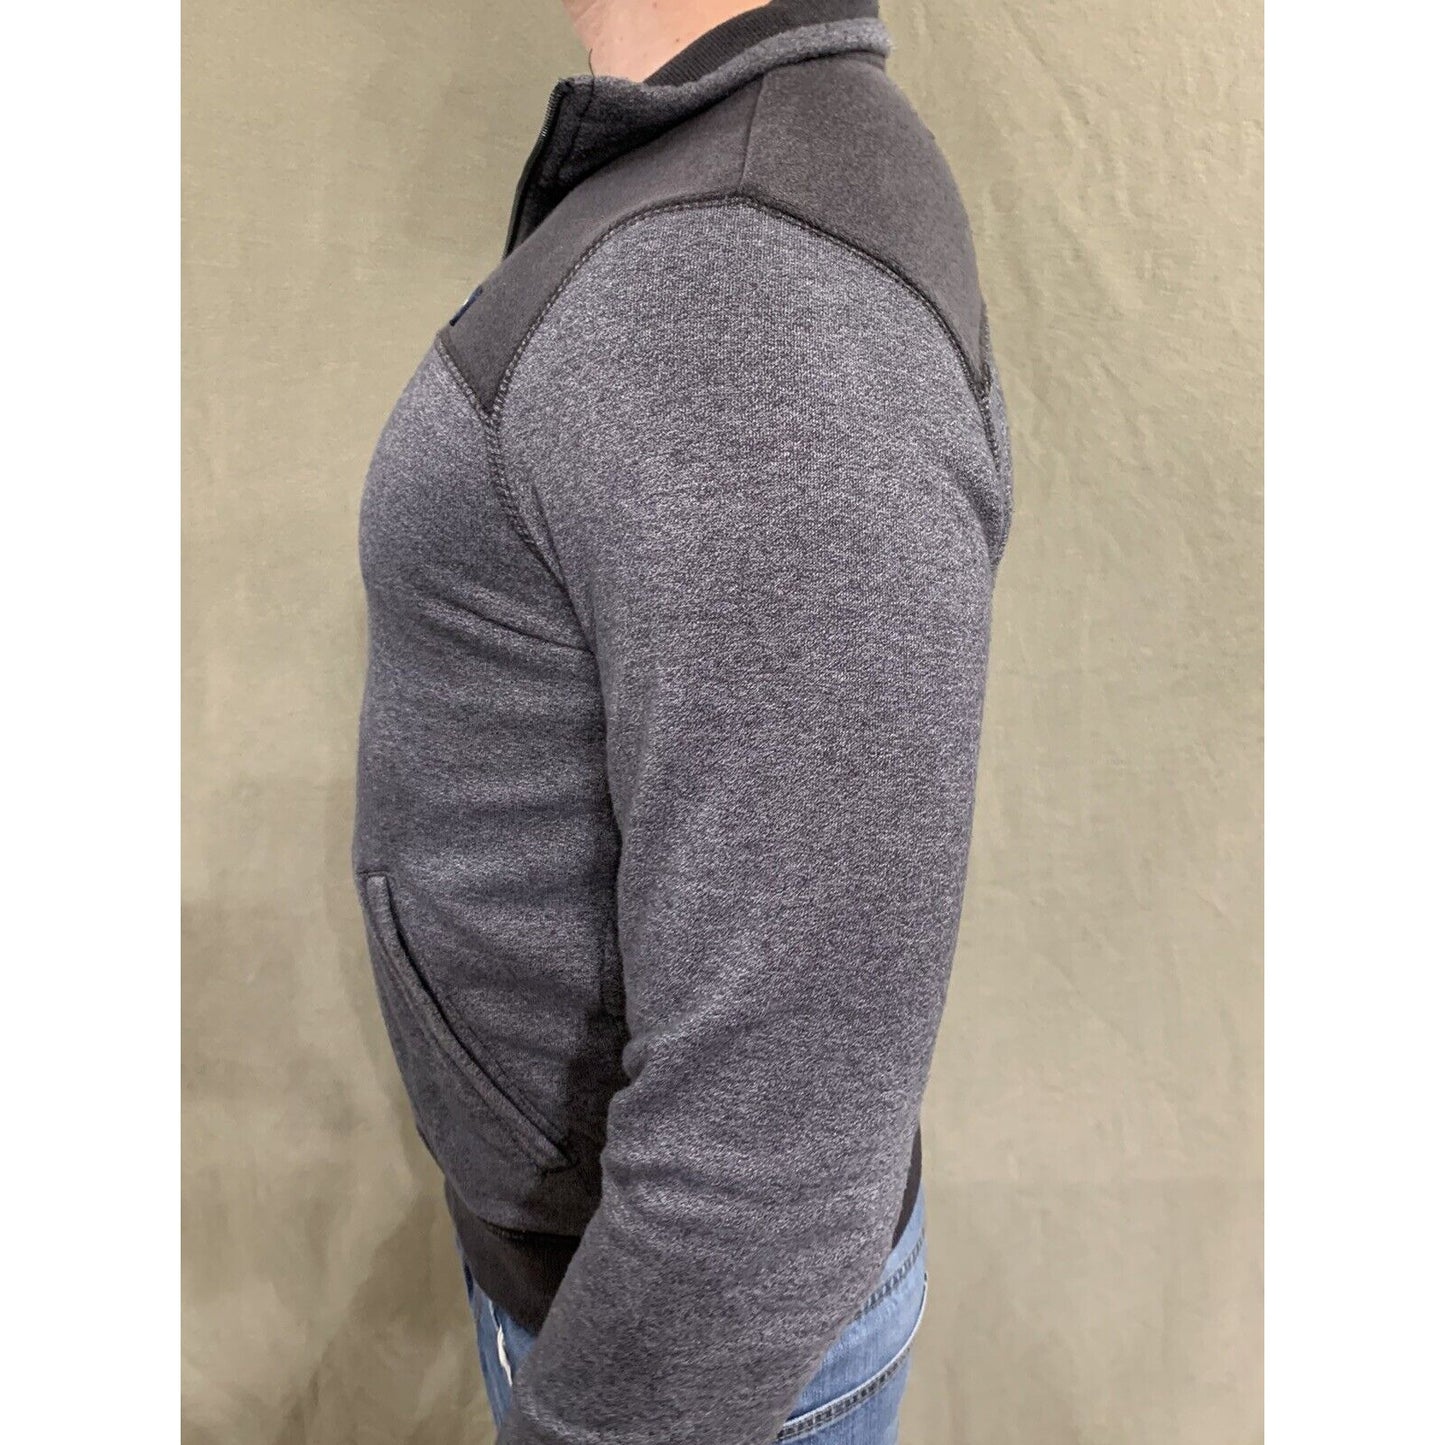 Aeropostale Gray 1/4 Zip Pullover Men's Size Extra Small